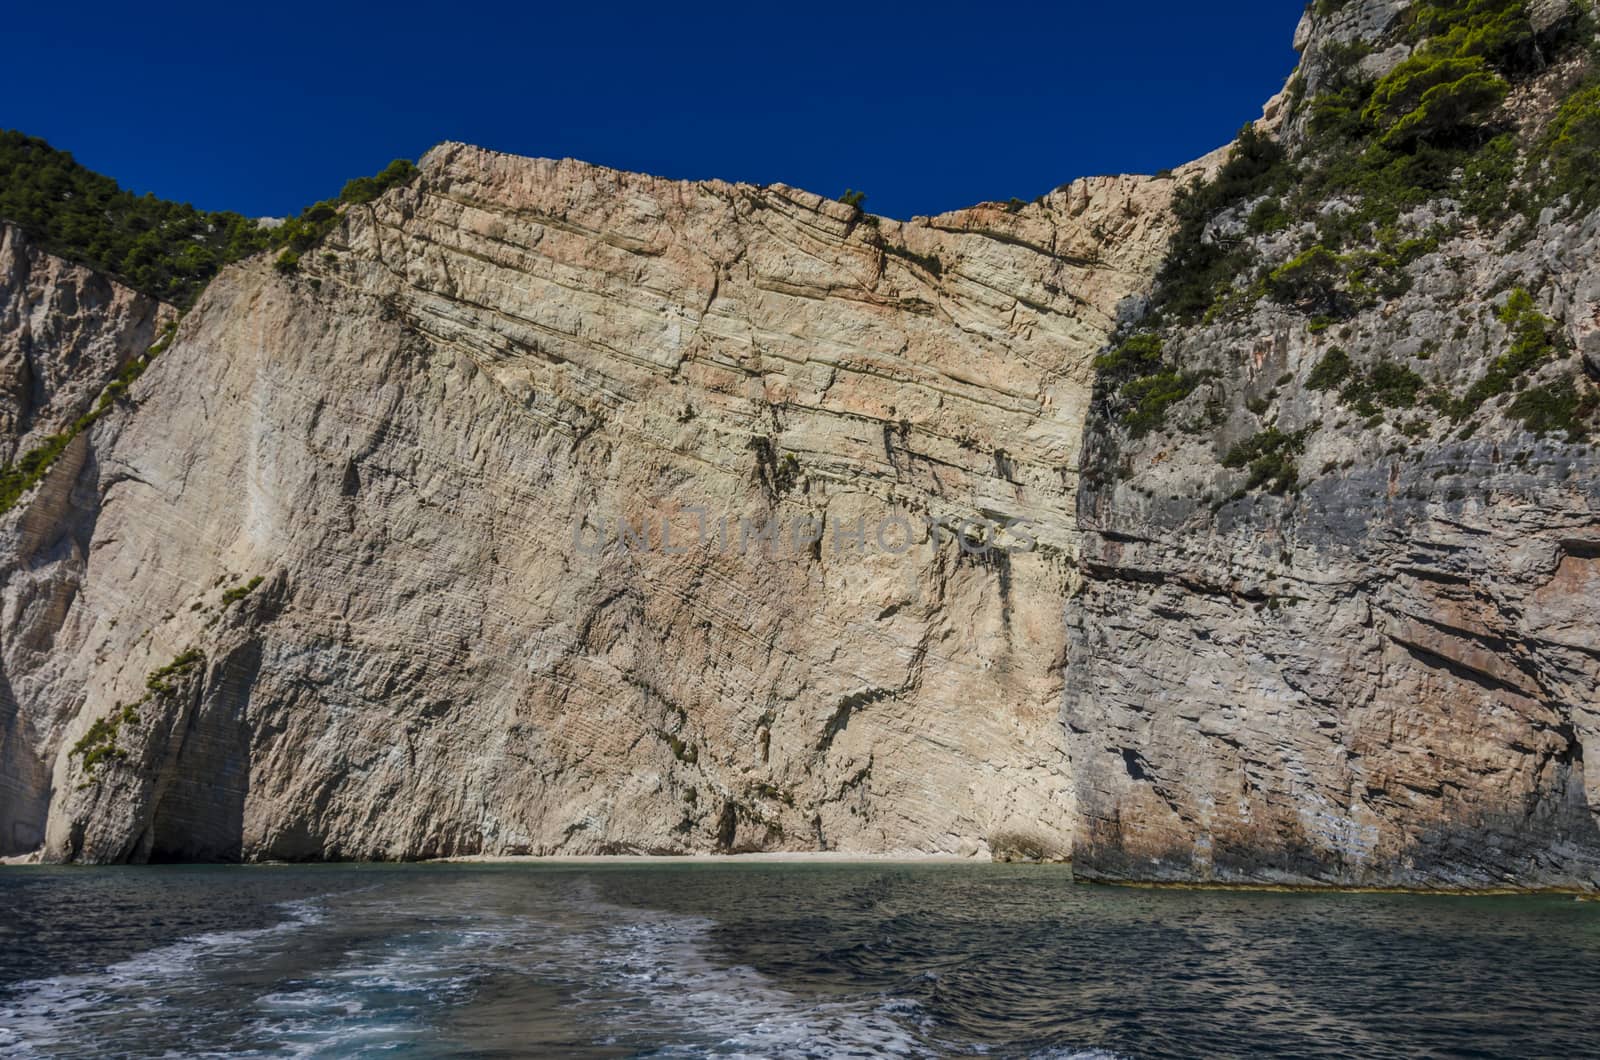 you can see the different layers of formation on the rock walls of the reefs and at sea level a sandy and rocks beach